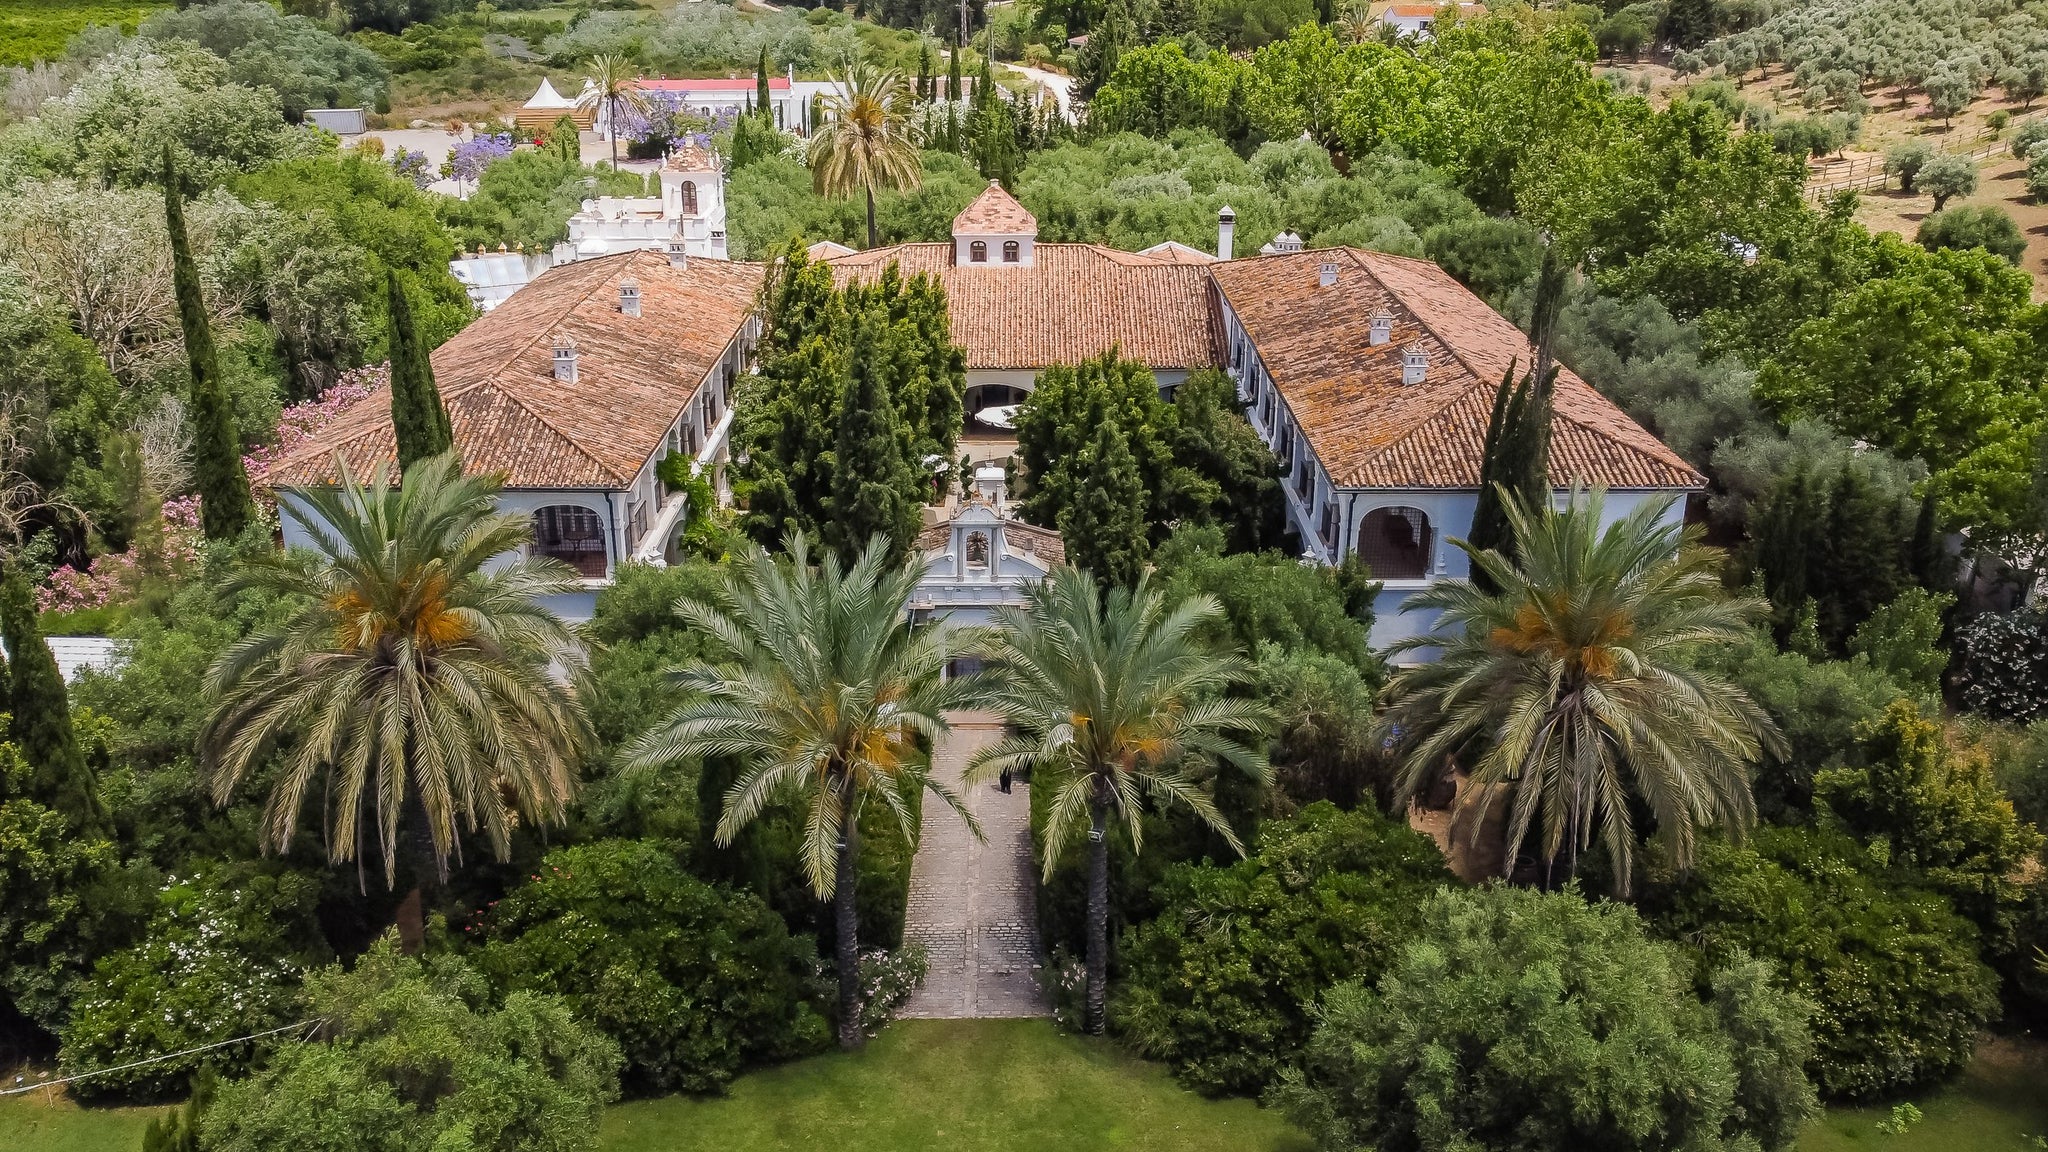 Aerial view of Finca Monasterio in Spain showing terracotta roof tiles and palm trees surrounding the main building.